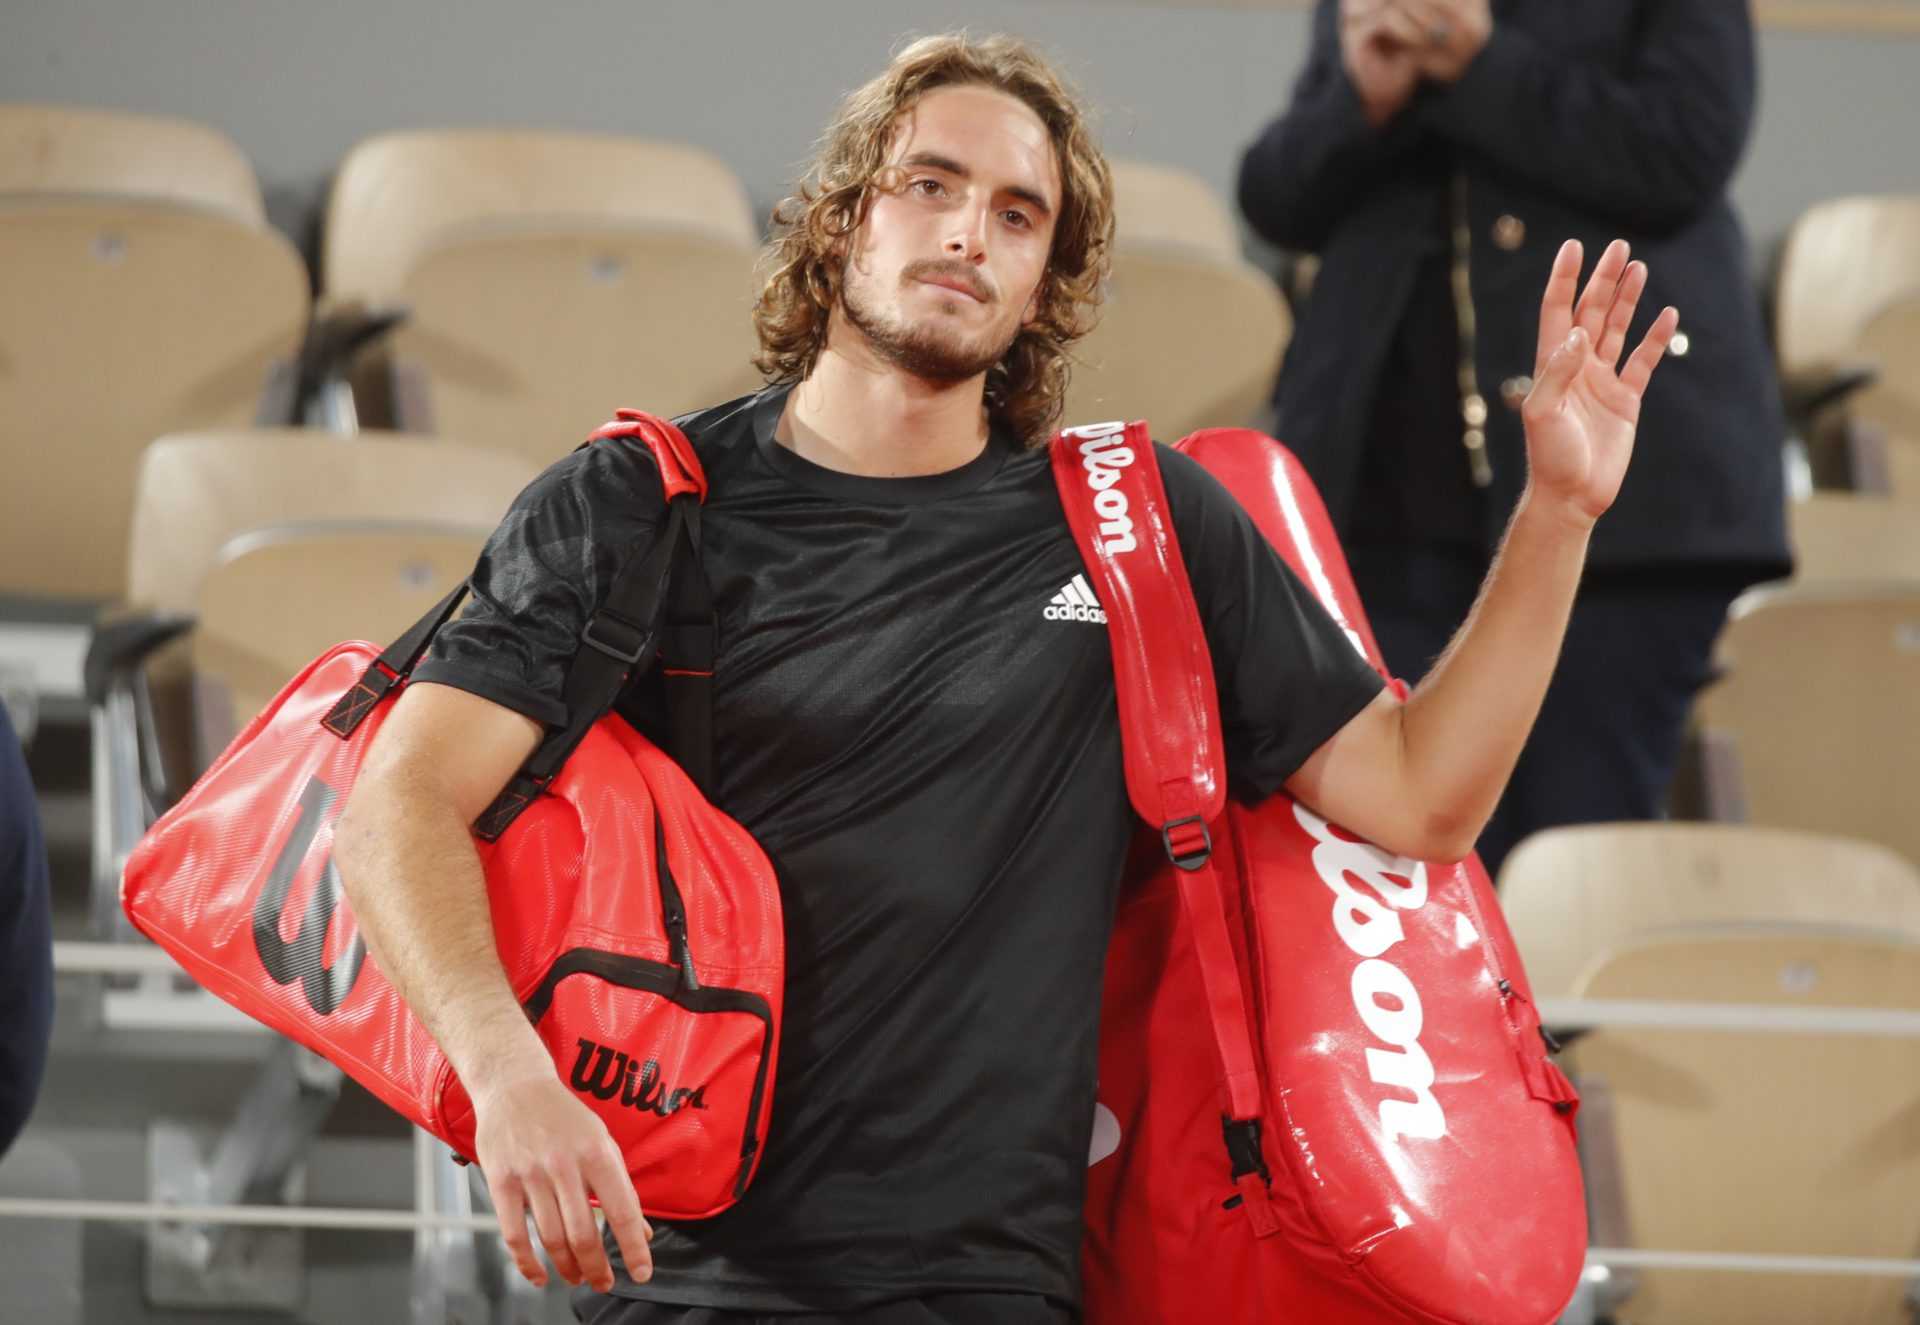 Stefanos Tsitsipas Announces Disheartening News After Successful Run at French Open 2020